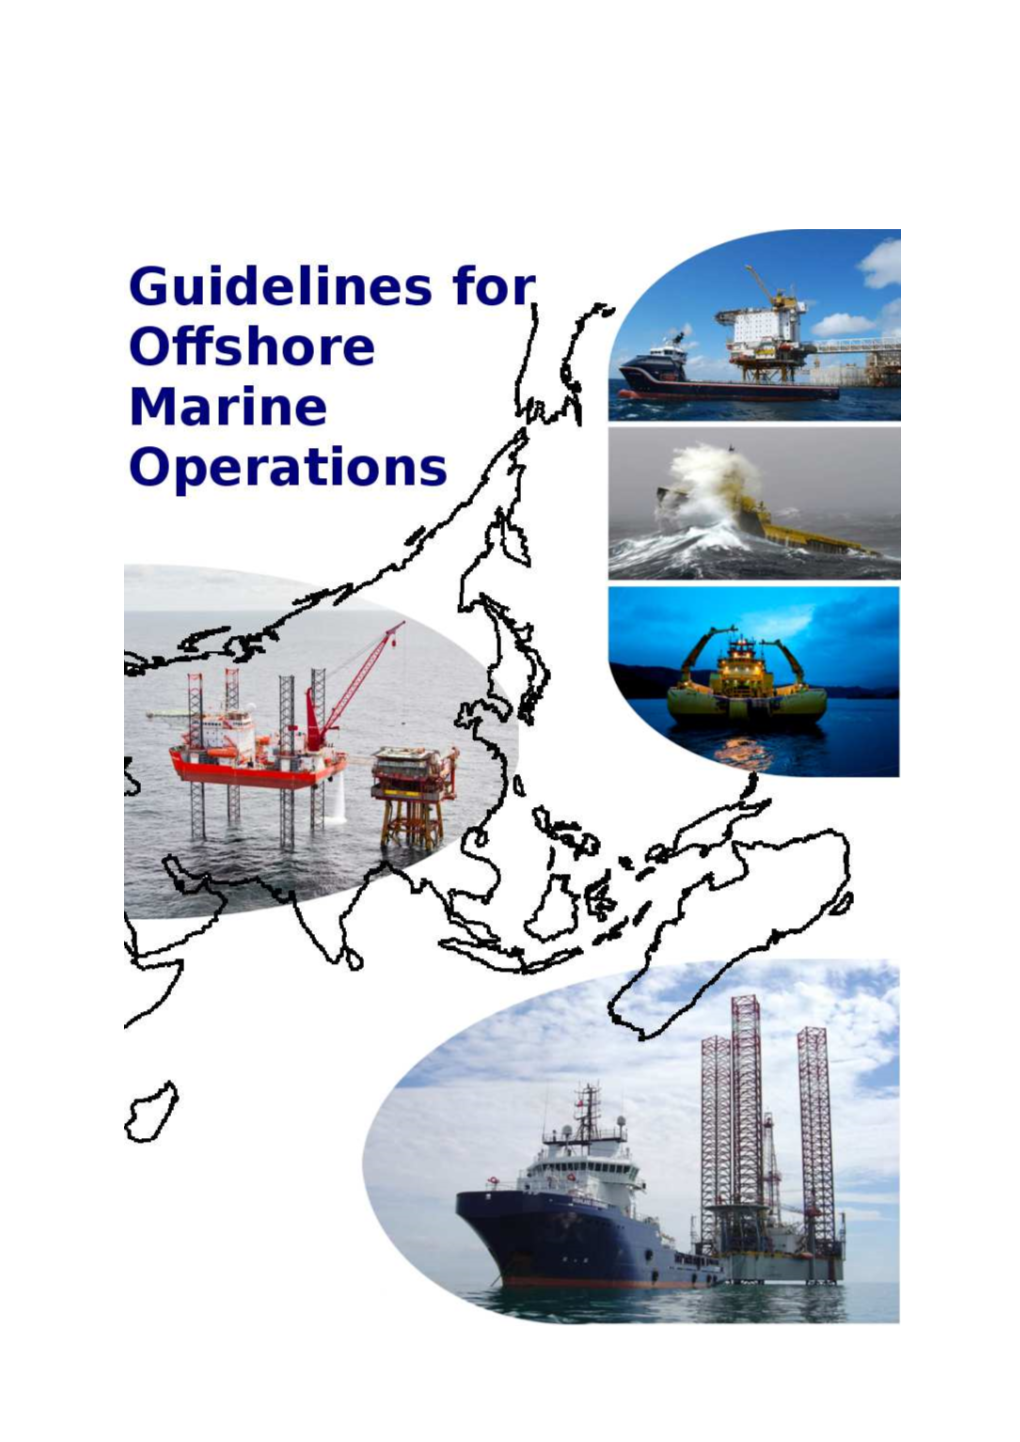 Guidelines for Offshore Marine Operations